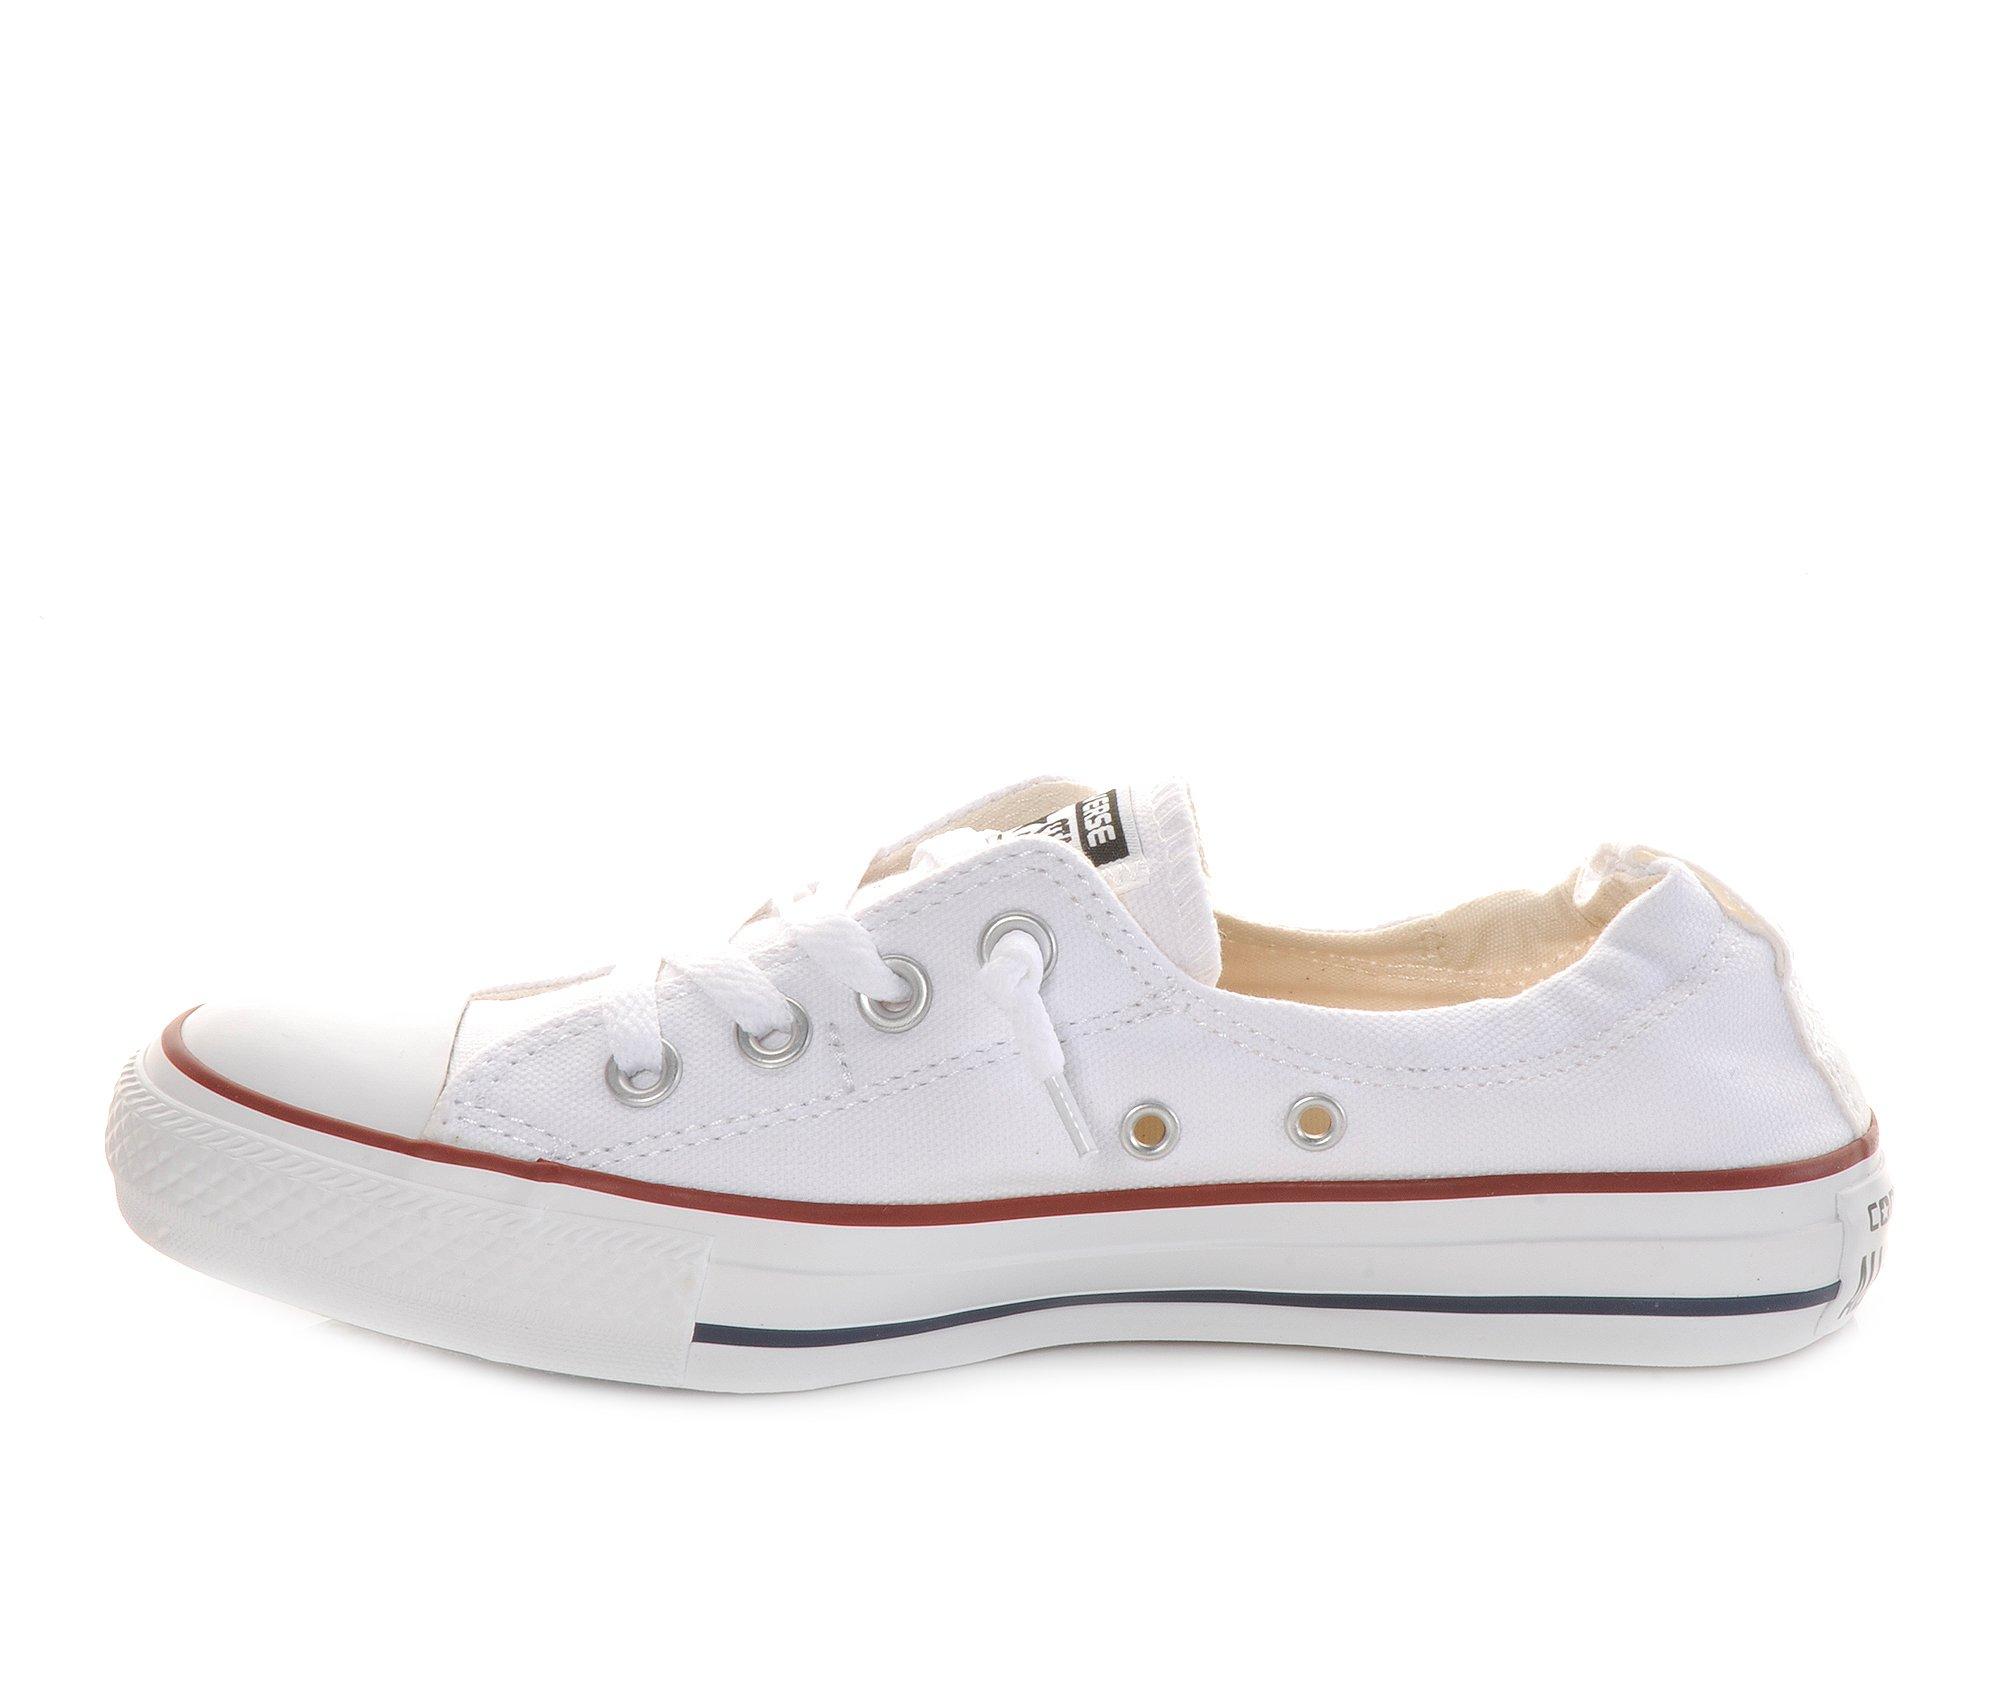 trolley bus supplere Canberra Women's Converse Chuck Taylor All Star Shoreline Sneakers